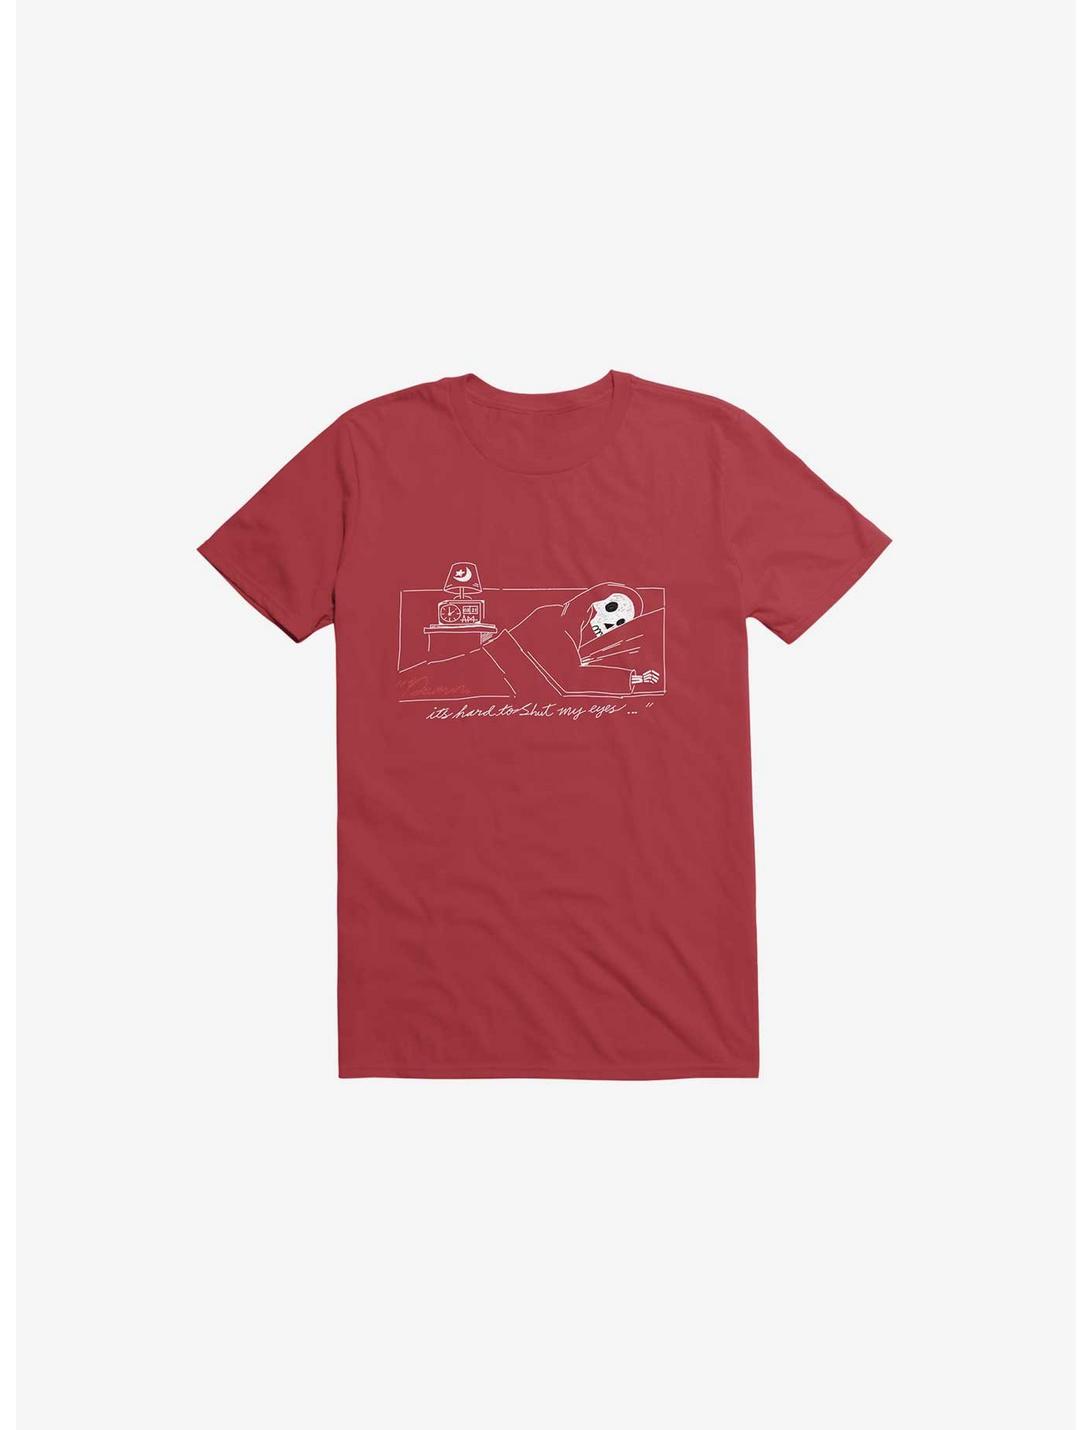 Damn, Sleepy Time Is Out T-Shirt, RED, hi-res